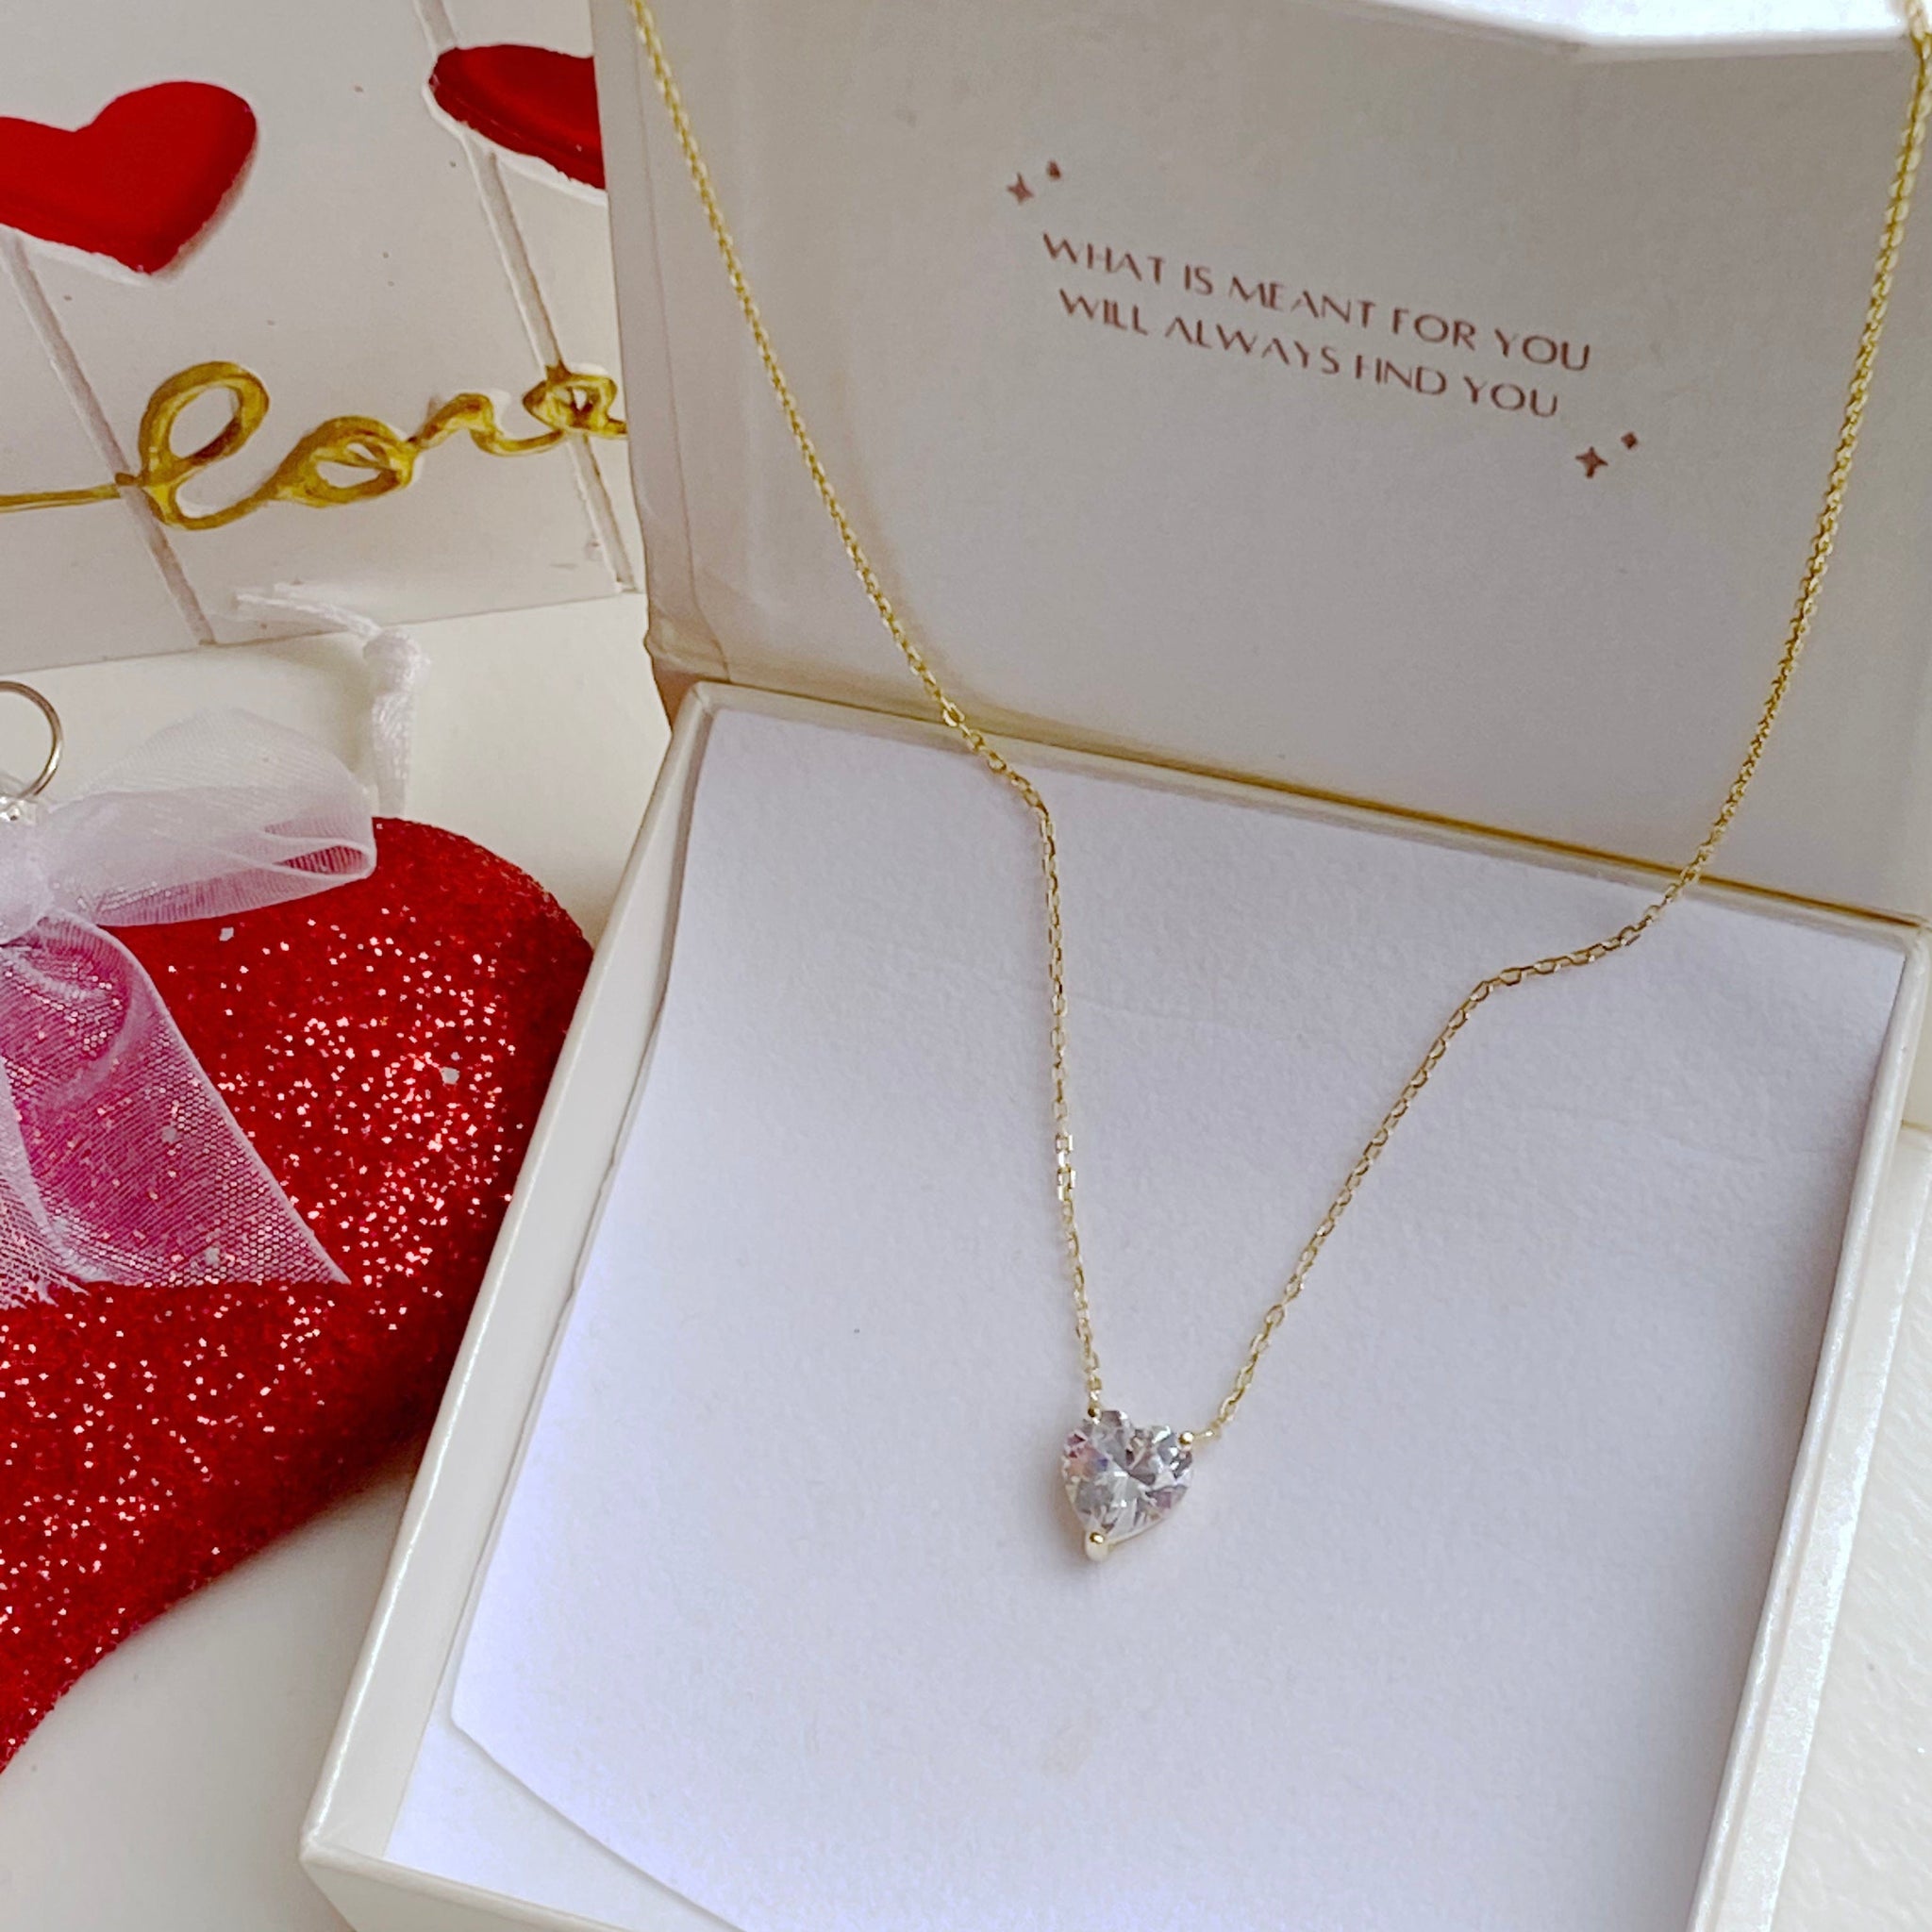 Floating Solitaire Heart CZ Necklace